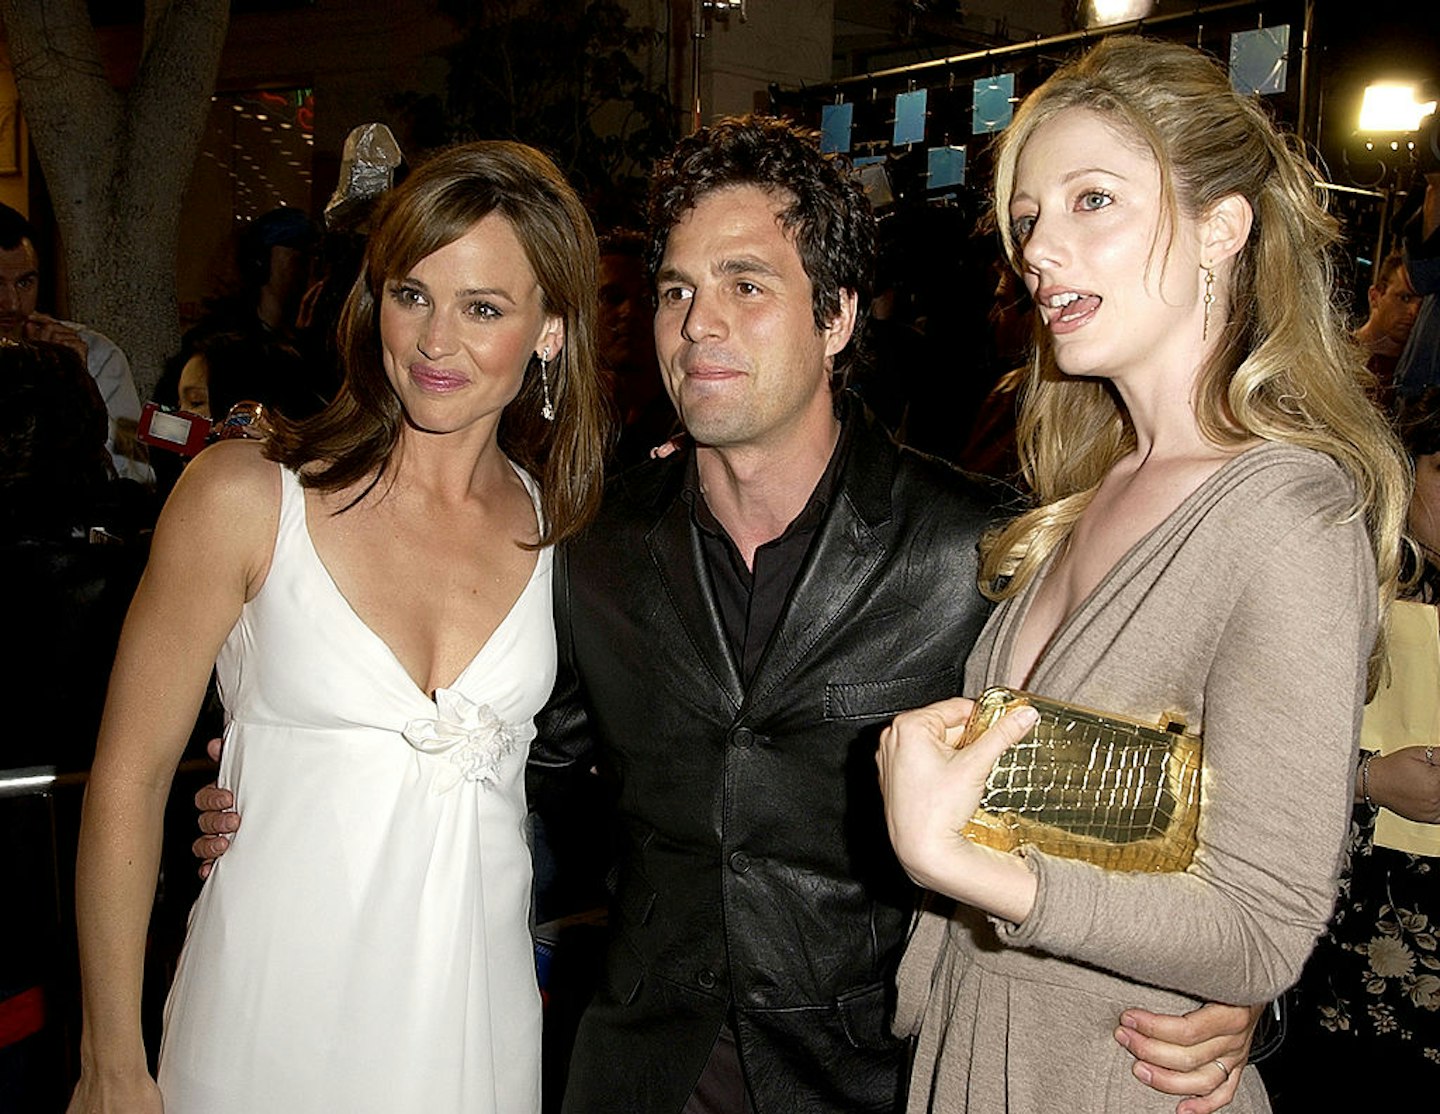 Jennifer Garner, Mark Ruffalo and Judy Greer at the premiere of 13 Going on 30